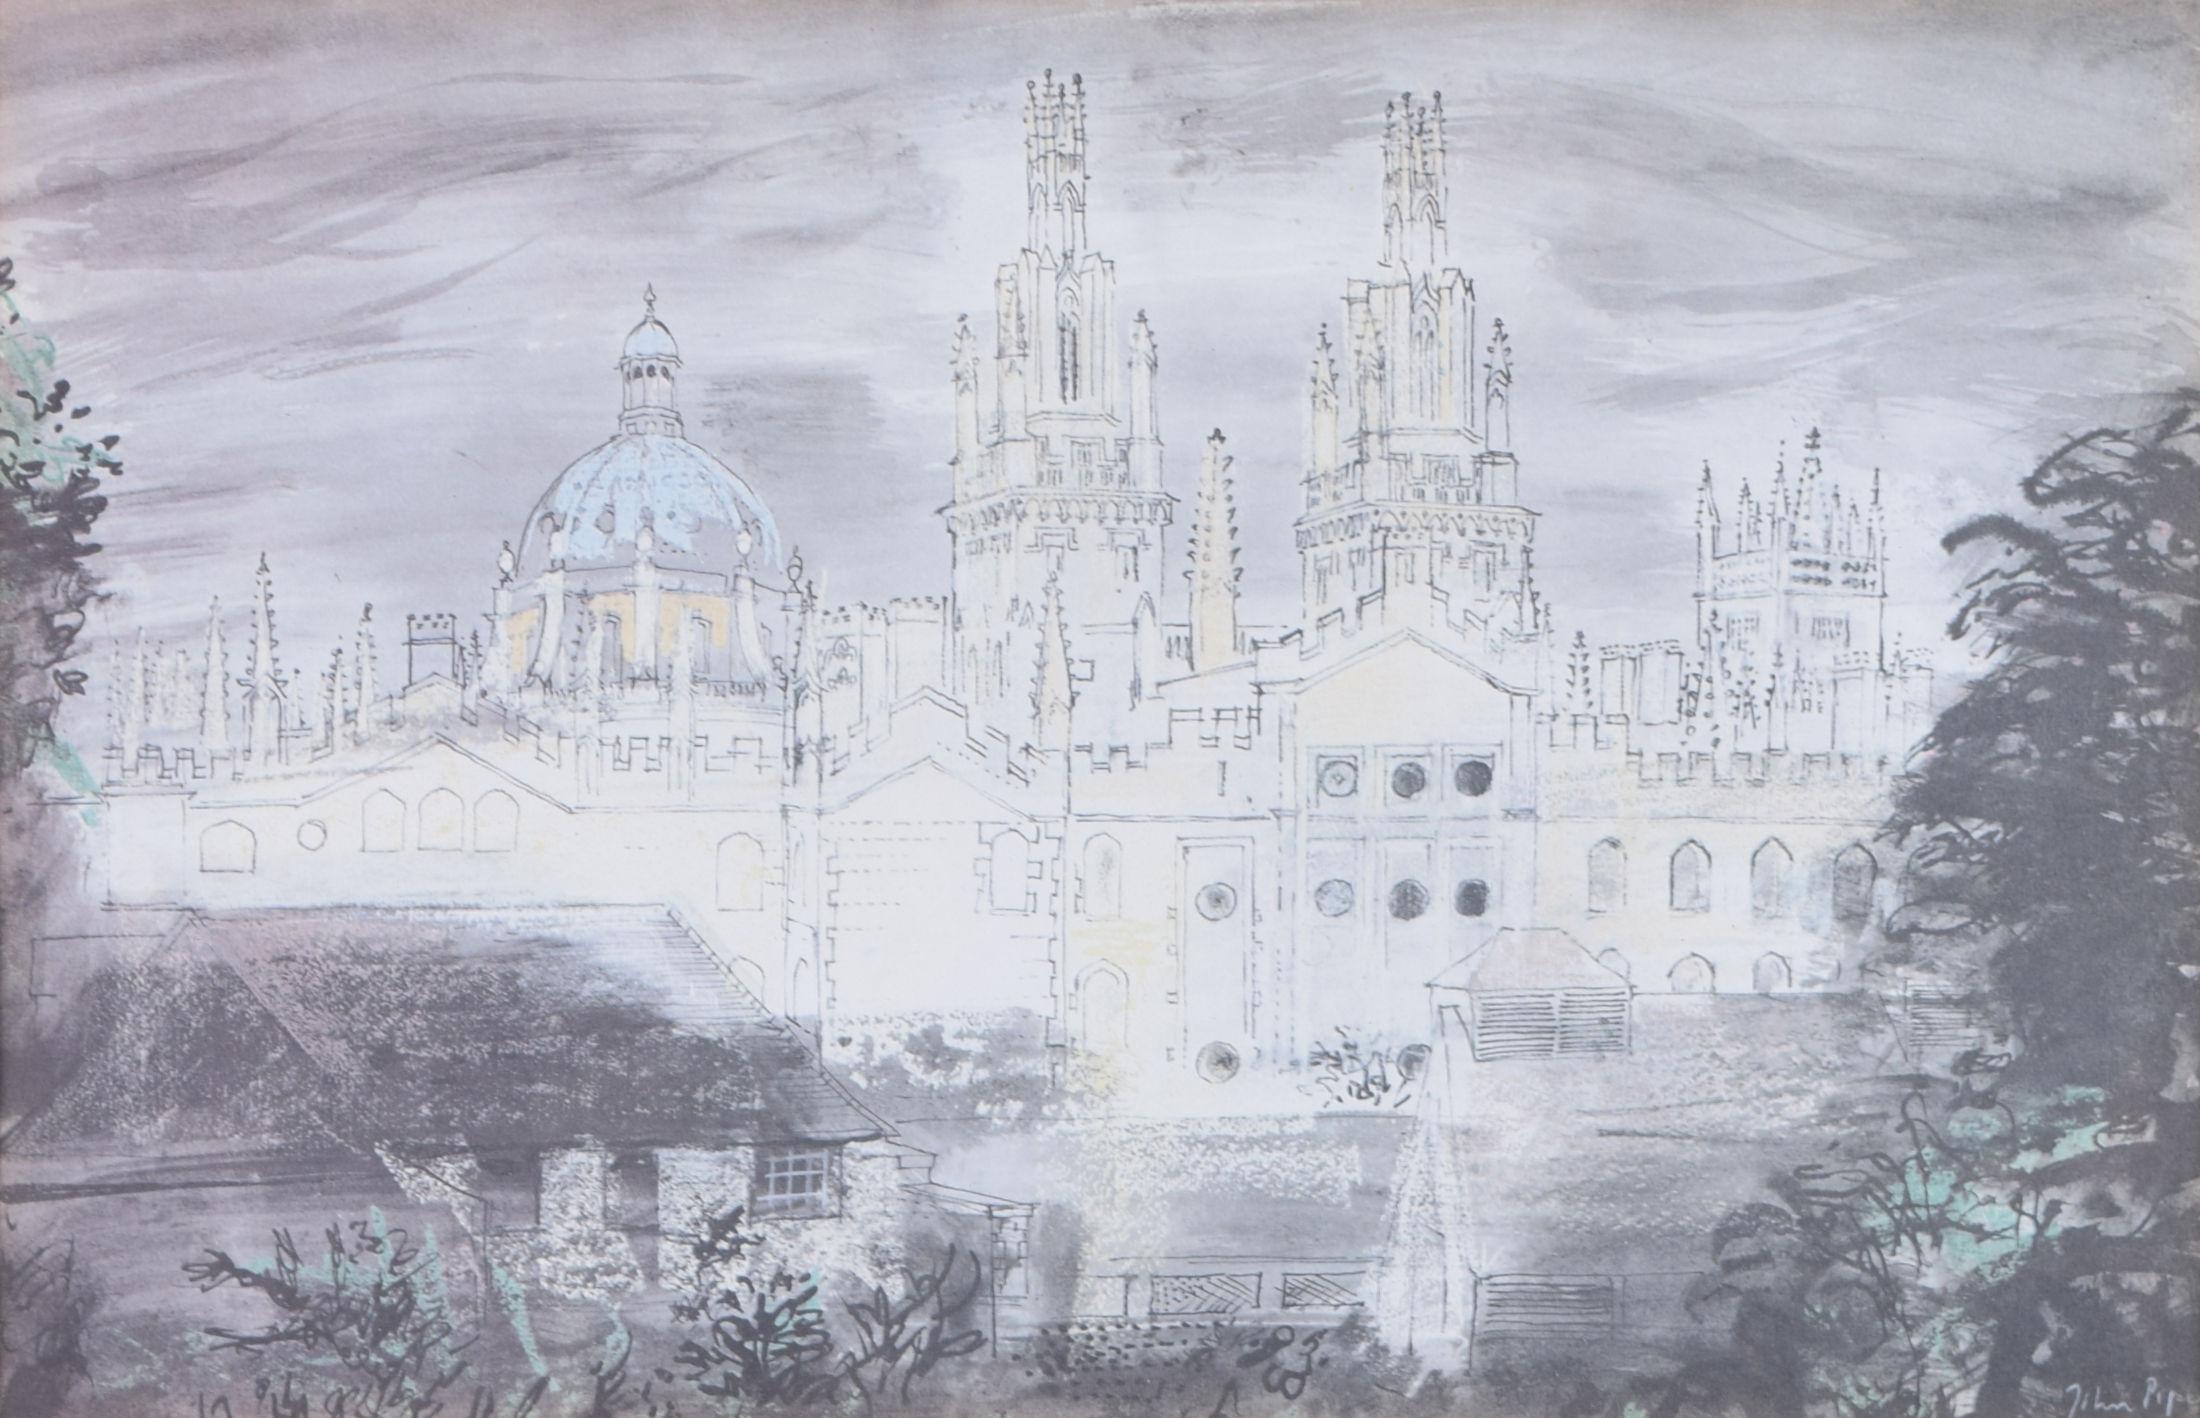 John Piper CH Landscape Print - All Souls (View from Queen's College, Oxford) John Piper 1972 lithograph